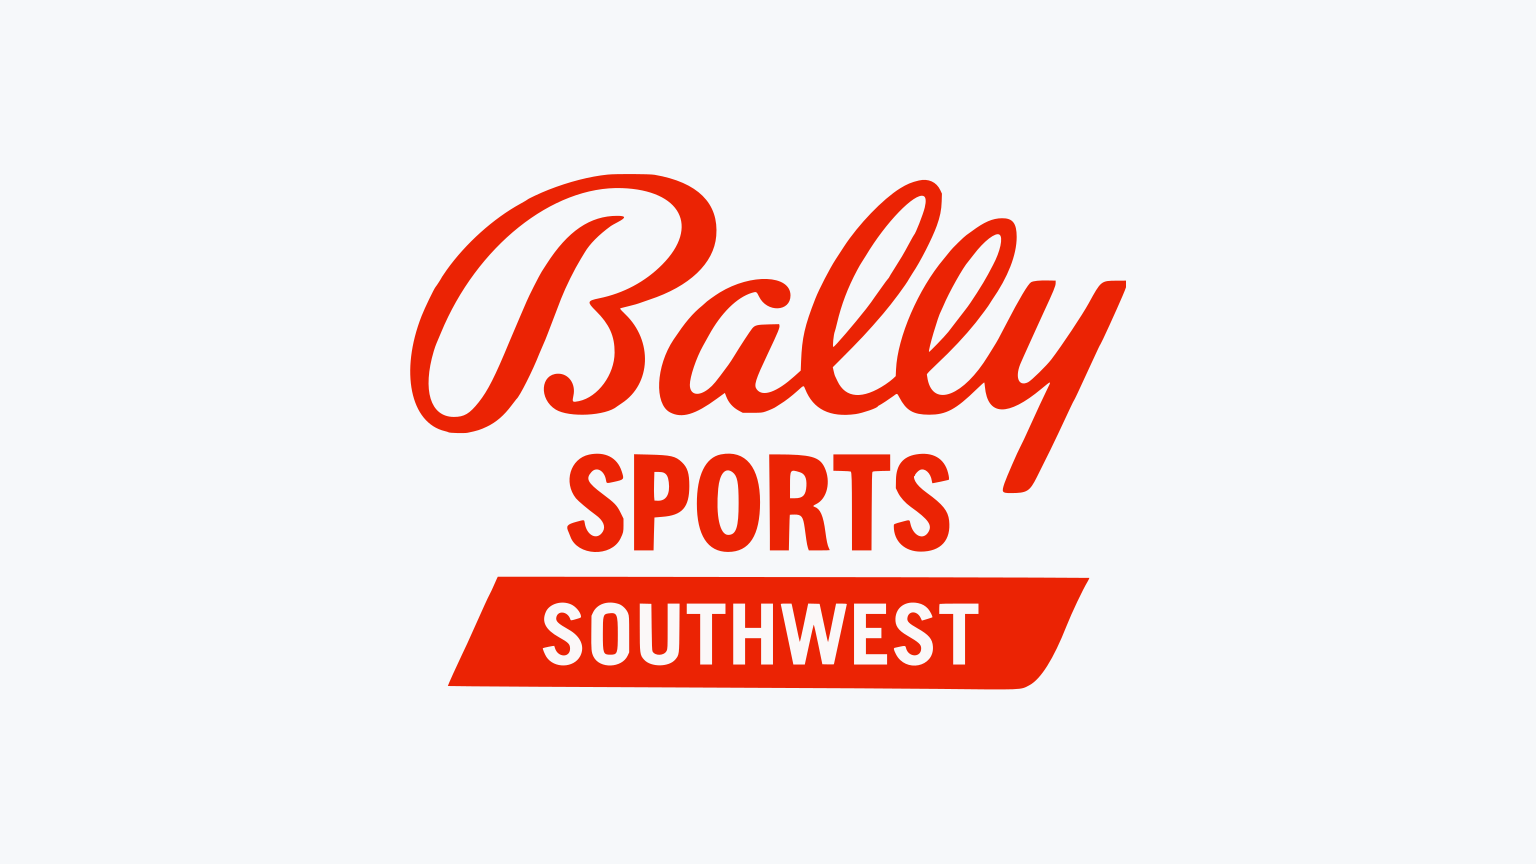 Ladies and gentlemen, a new - Bally Sports Southwest